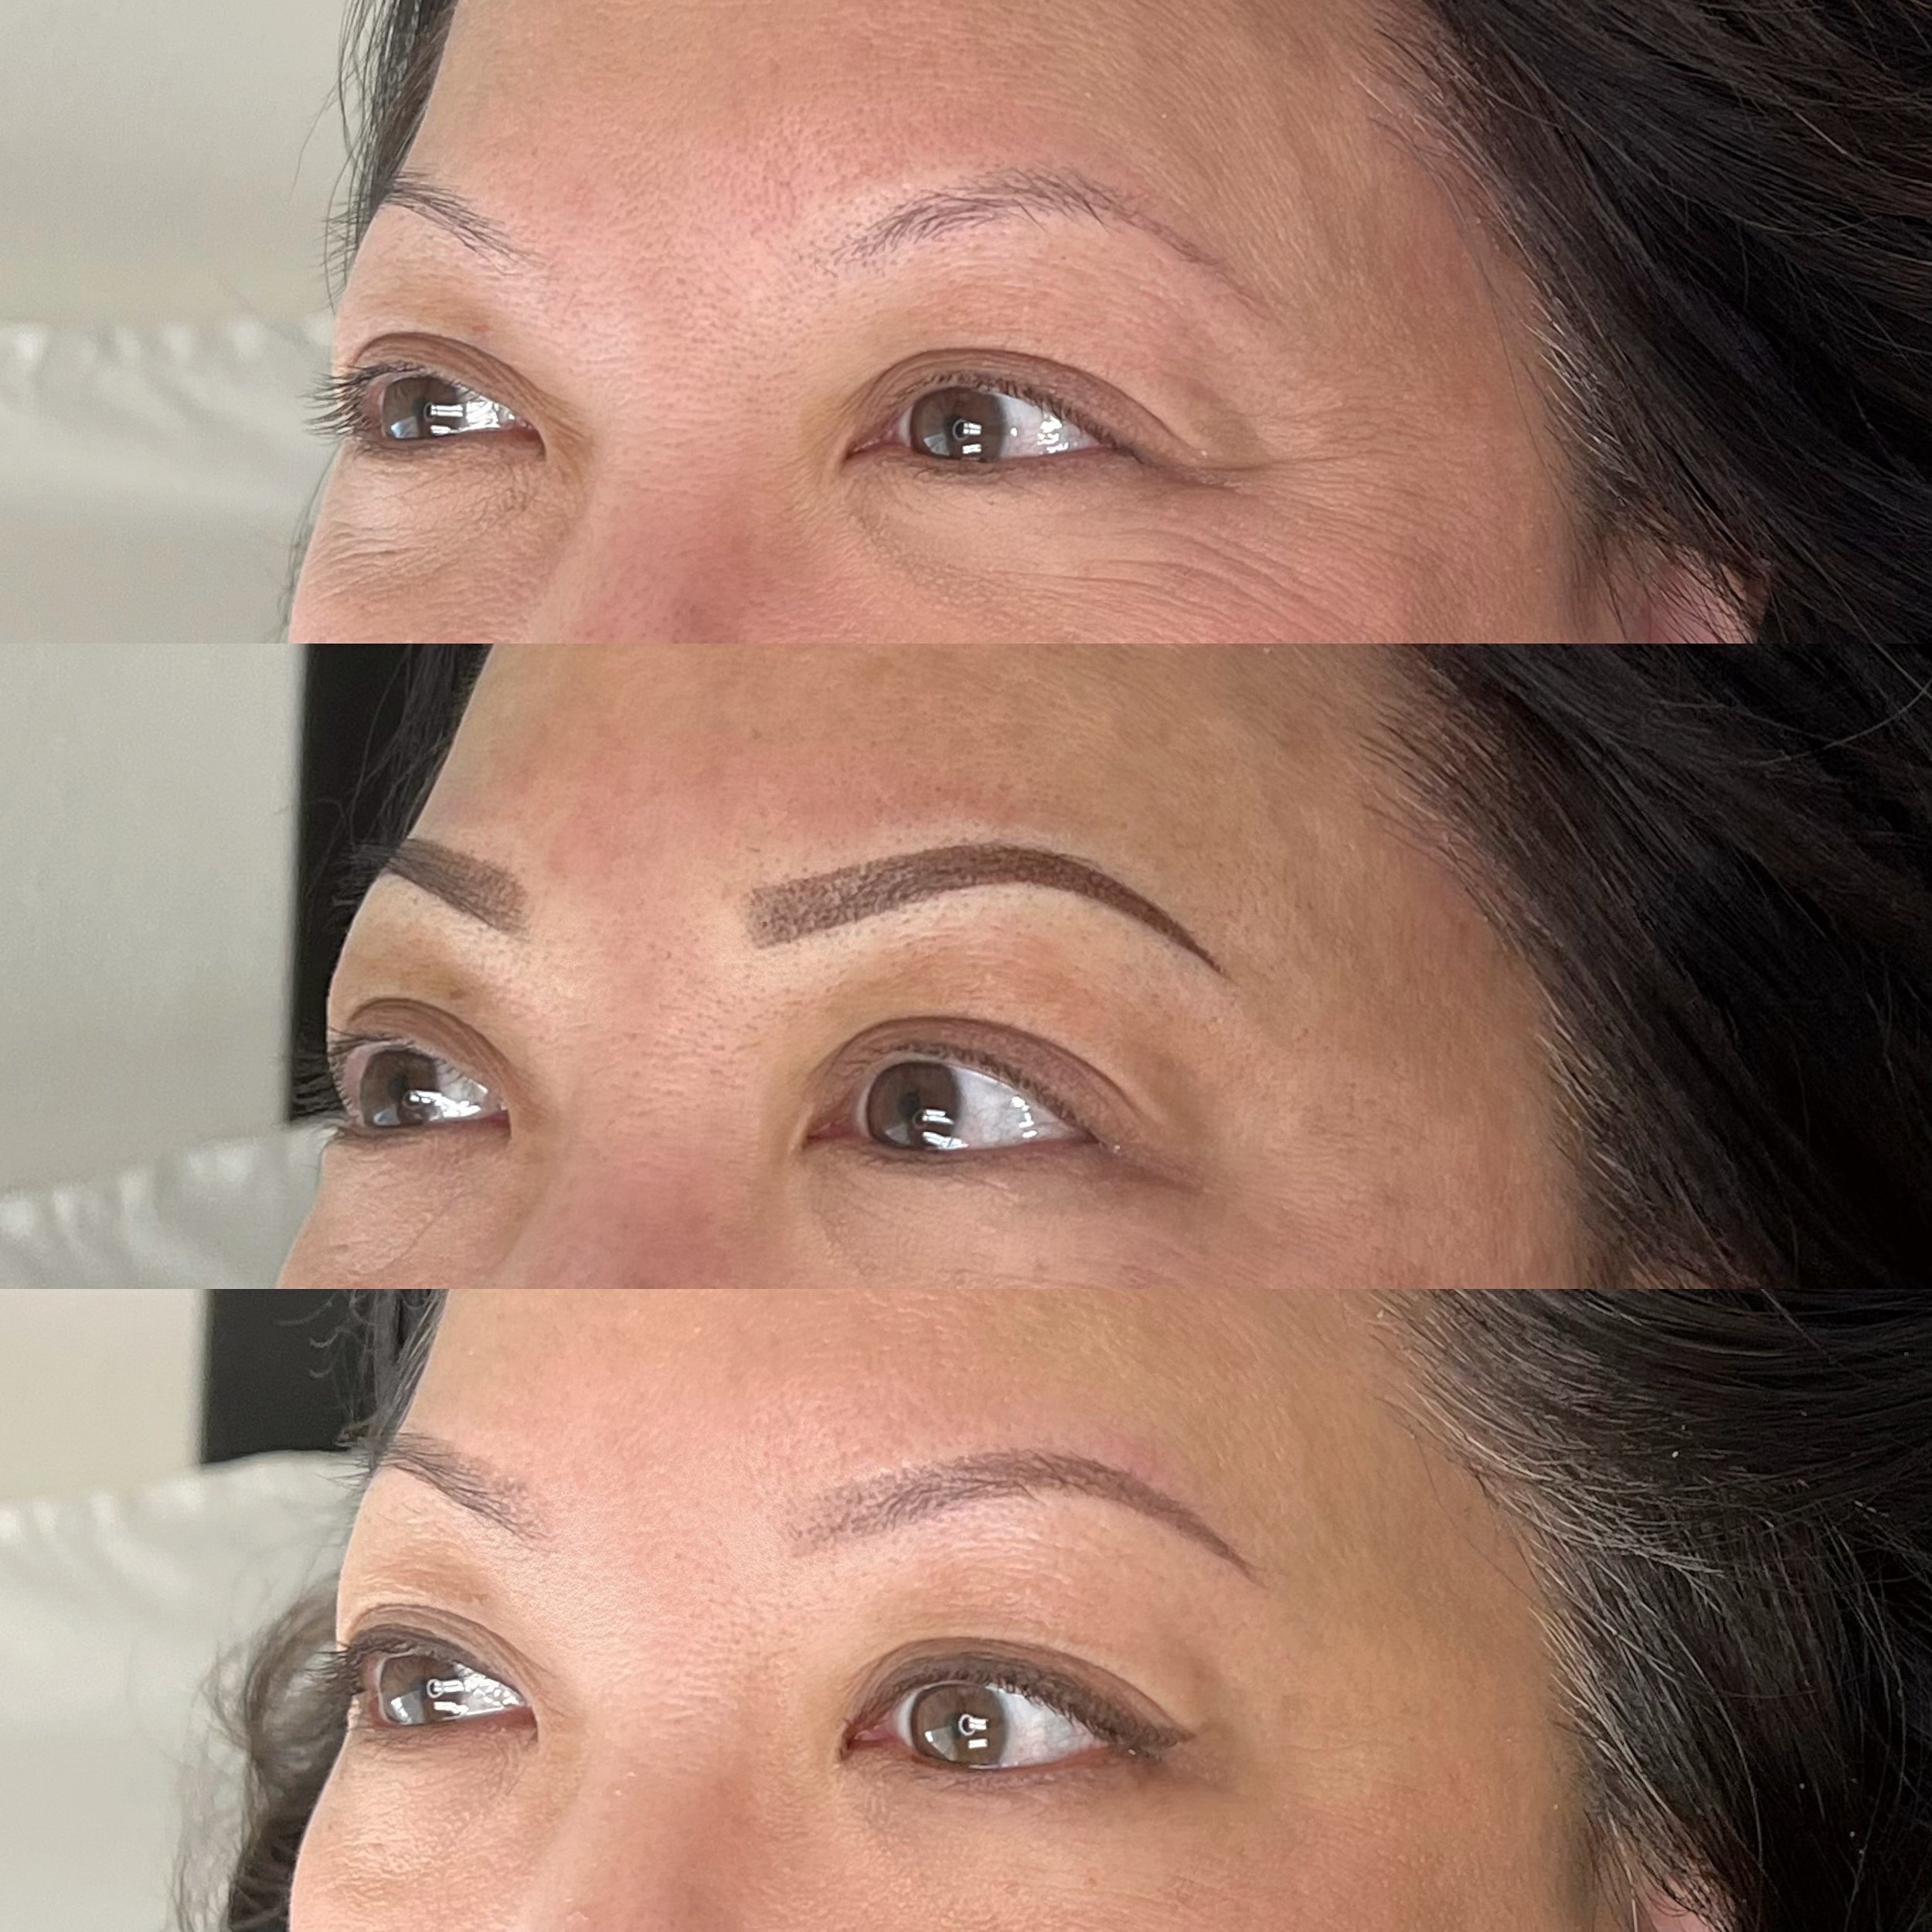 Before, Fresh, and Healed powder brows💜
I cannot stress it enough, they WILL be so much softer once healed and it&rsquo;s worth the bold 7-10 days! Don&rsquo;t judge any brow tattoos by the first week, judge the healed look✍🏼
We went with powder fo